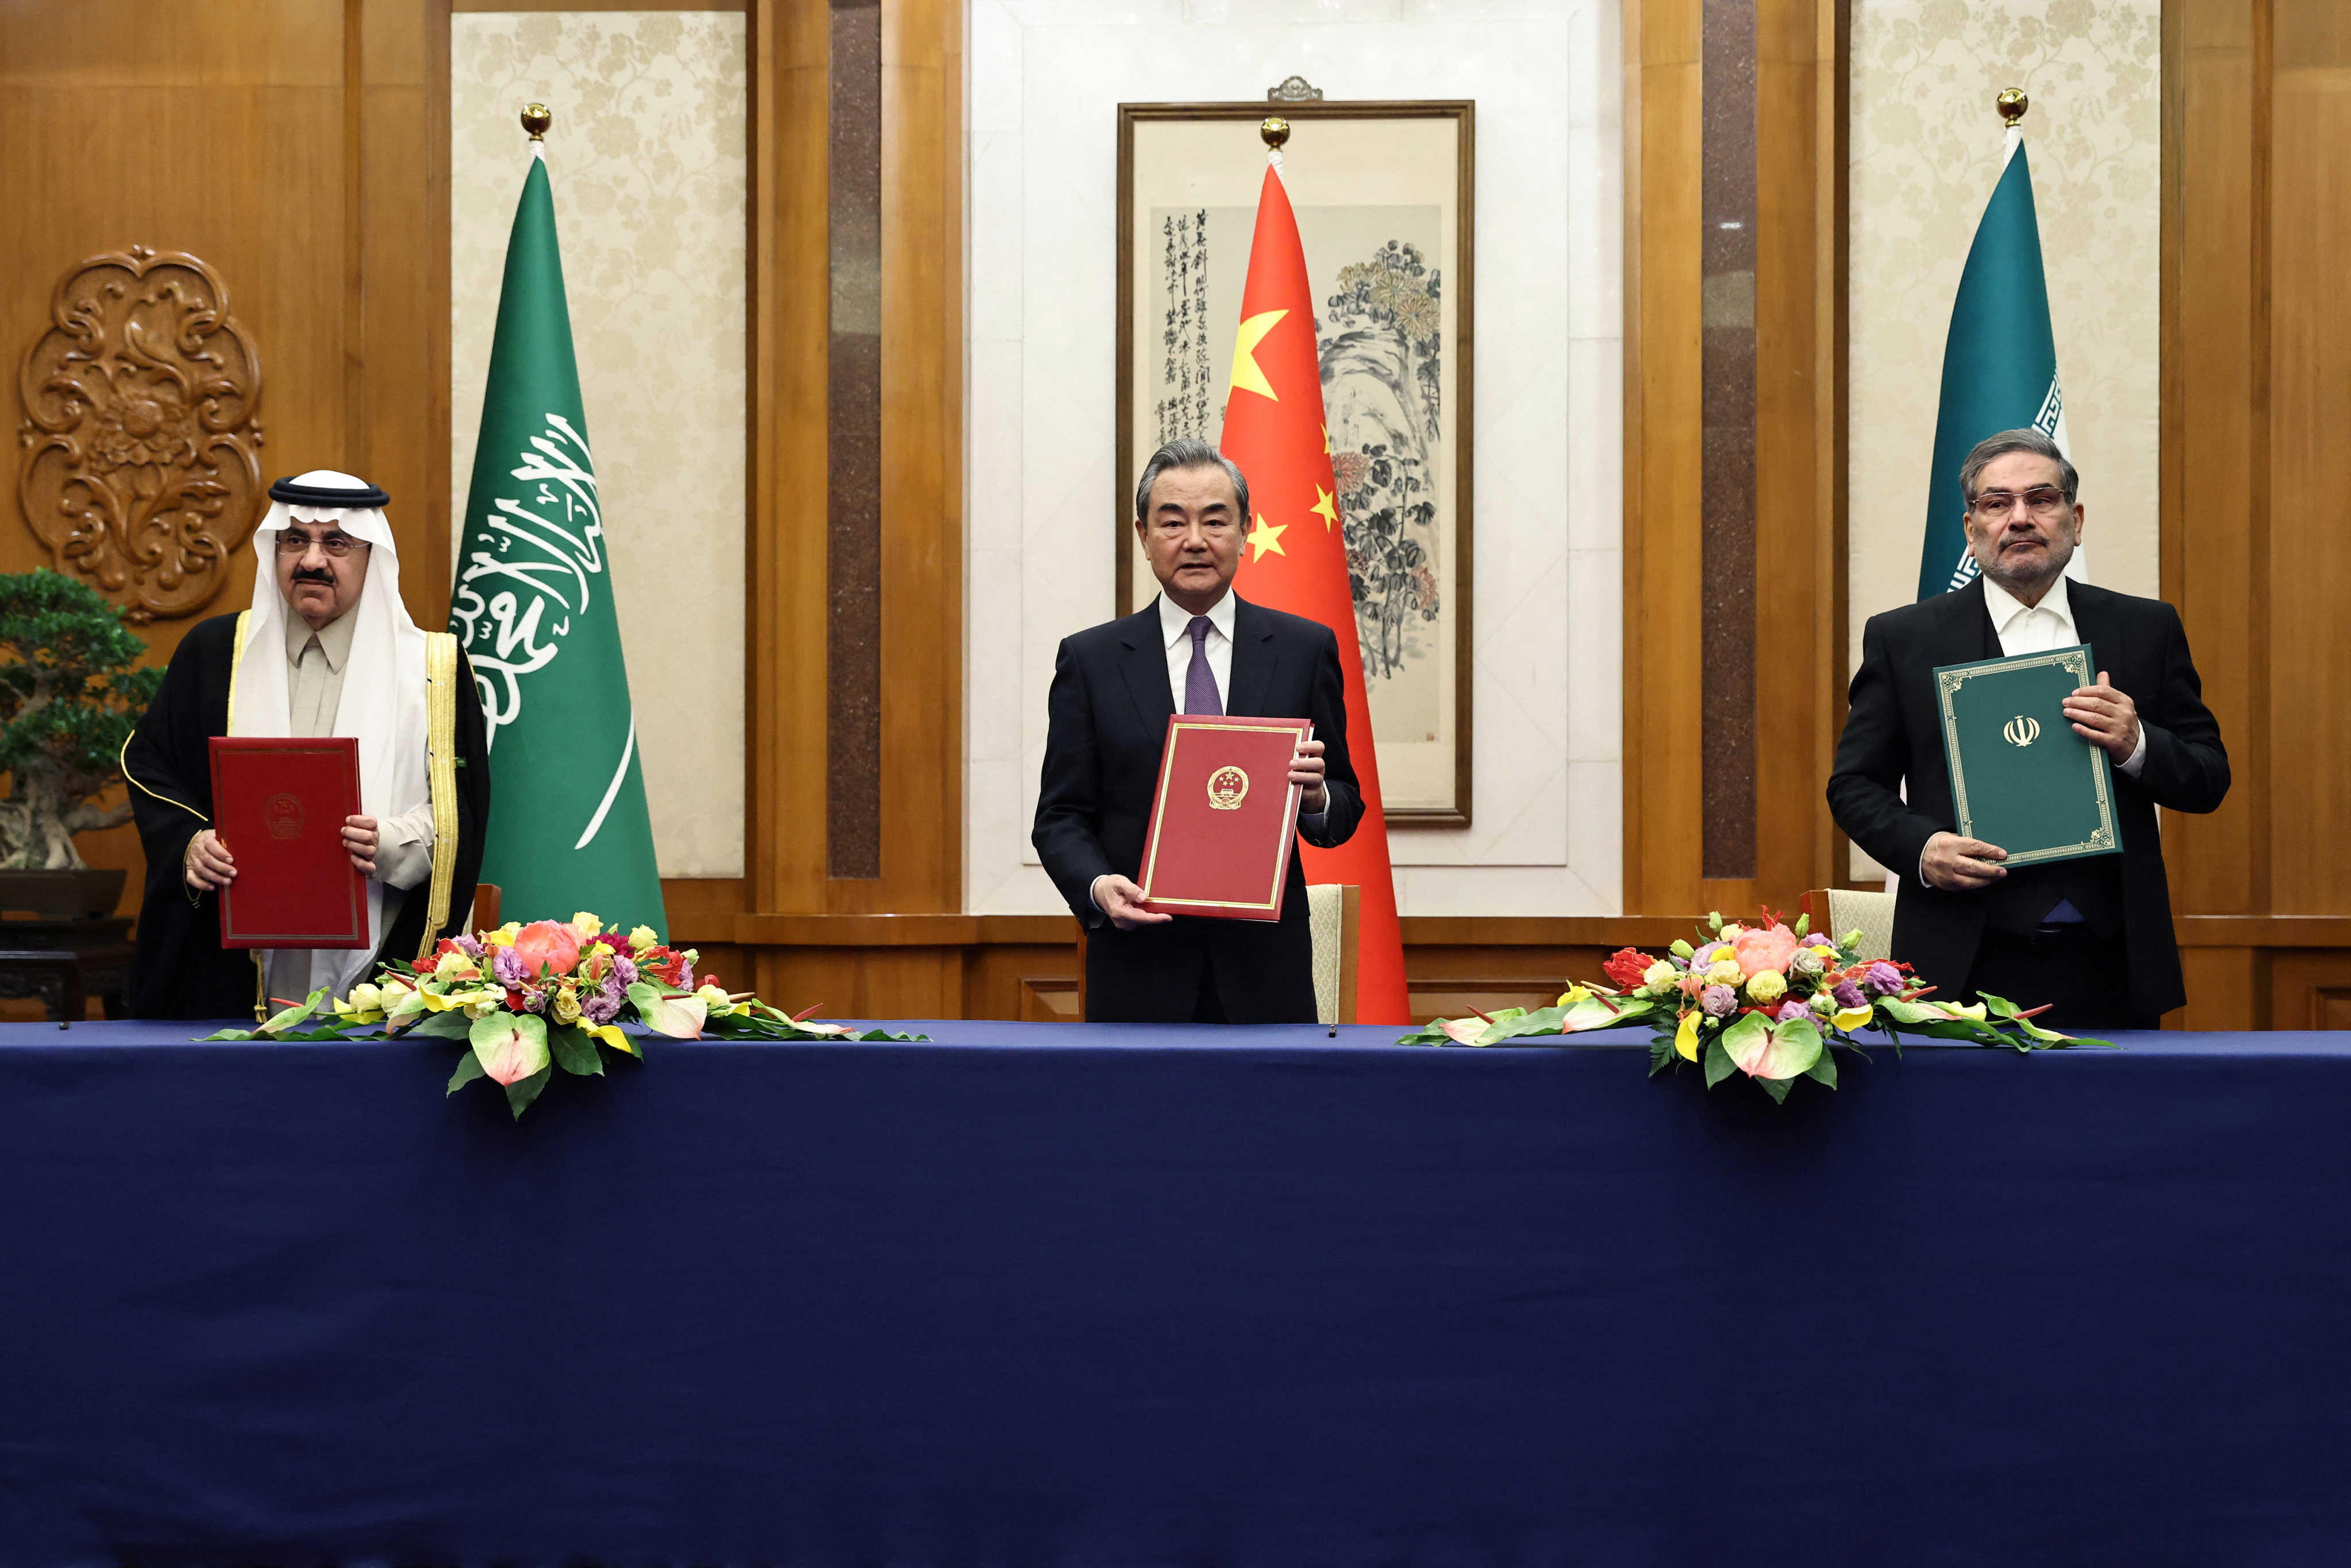 China’s top diplomat Wang Yi (centre) attends a meeting with Saudi Arabia’s national security adviser Musaad bin Mohammed Al-Aiban (left) and Ali Shamkhani, secretary of Iran’s Supreme National Security Council, in Beijing on March 10. Whether the China-brokered detente between Riyadh and Tehran holds will be keenly watched. Photo: China Daily via Reuters